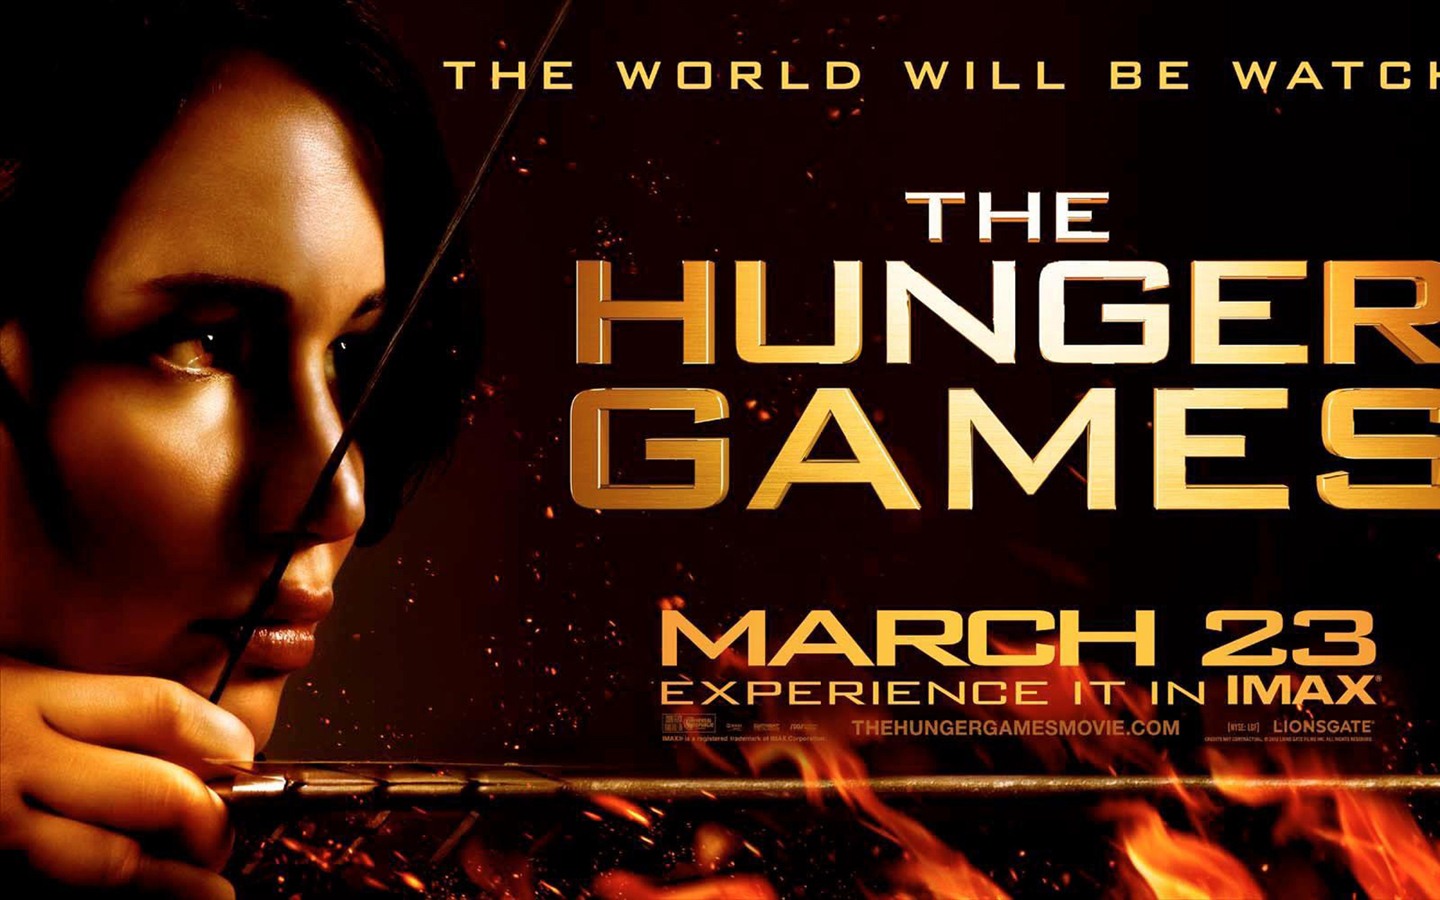 The Hunger Games HD wallpapers #5 - 1440x900